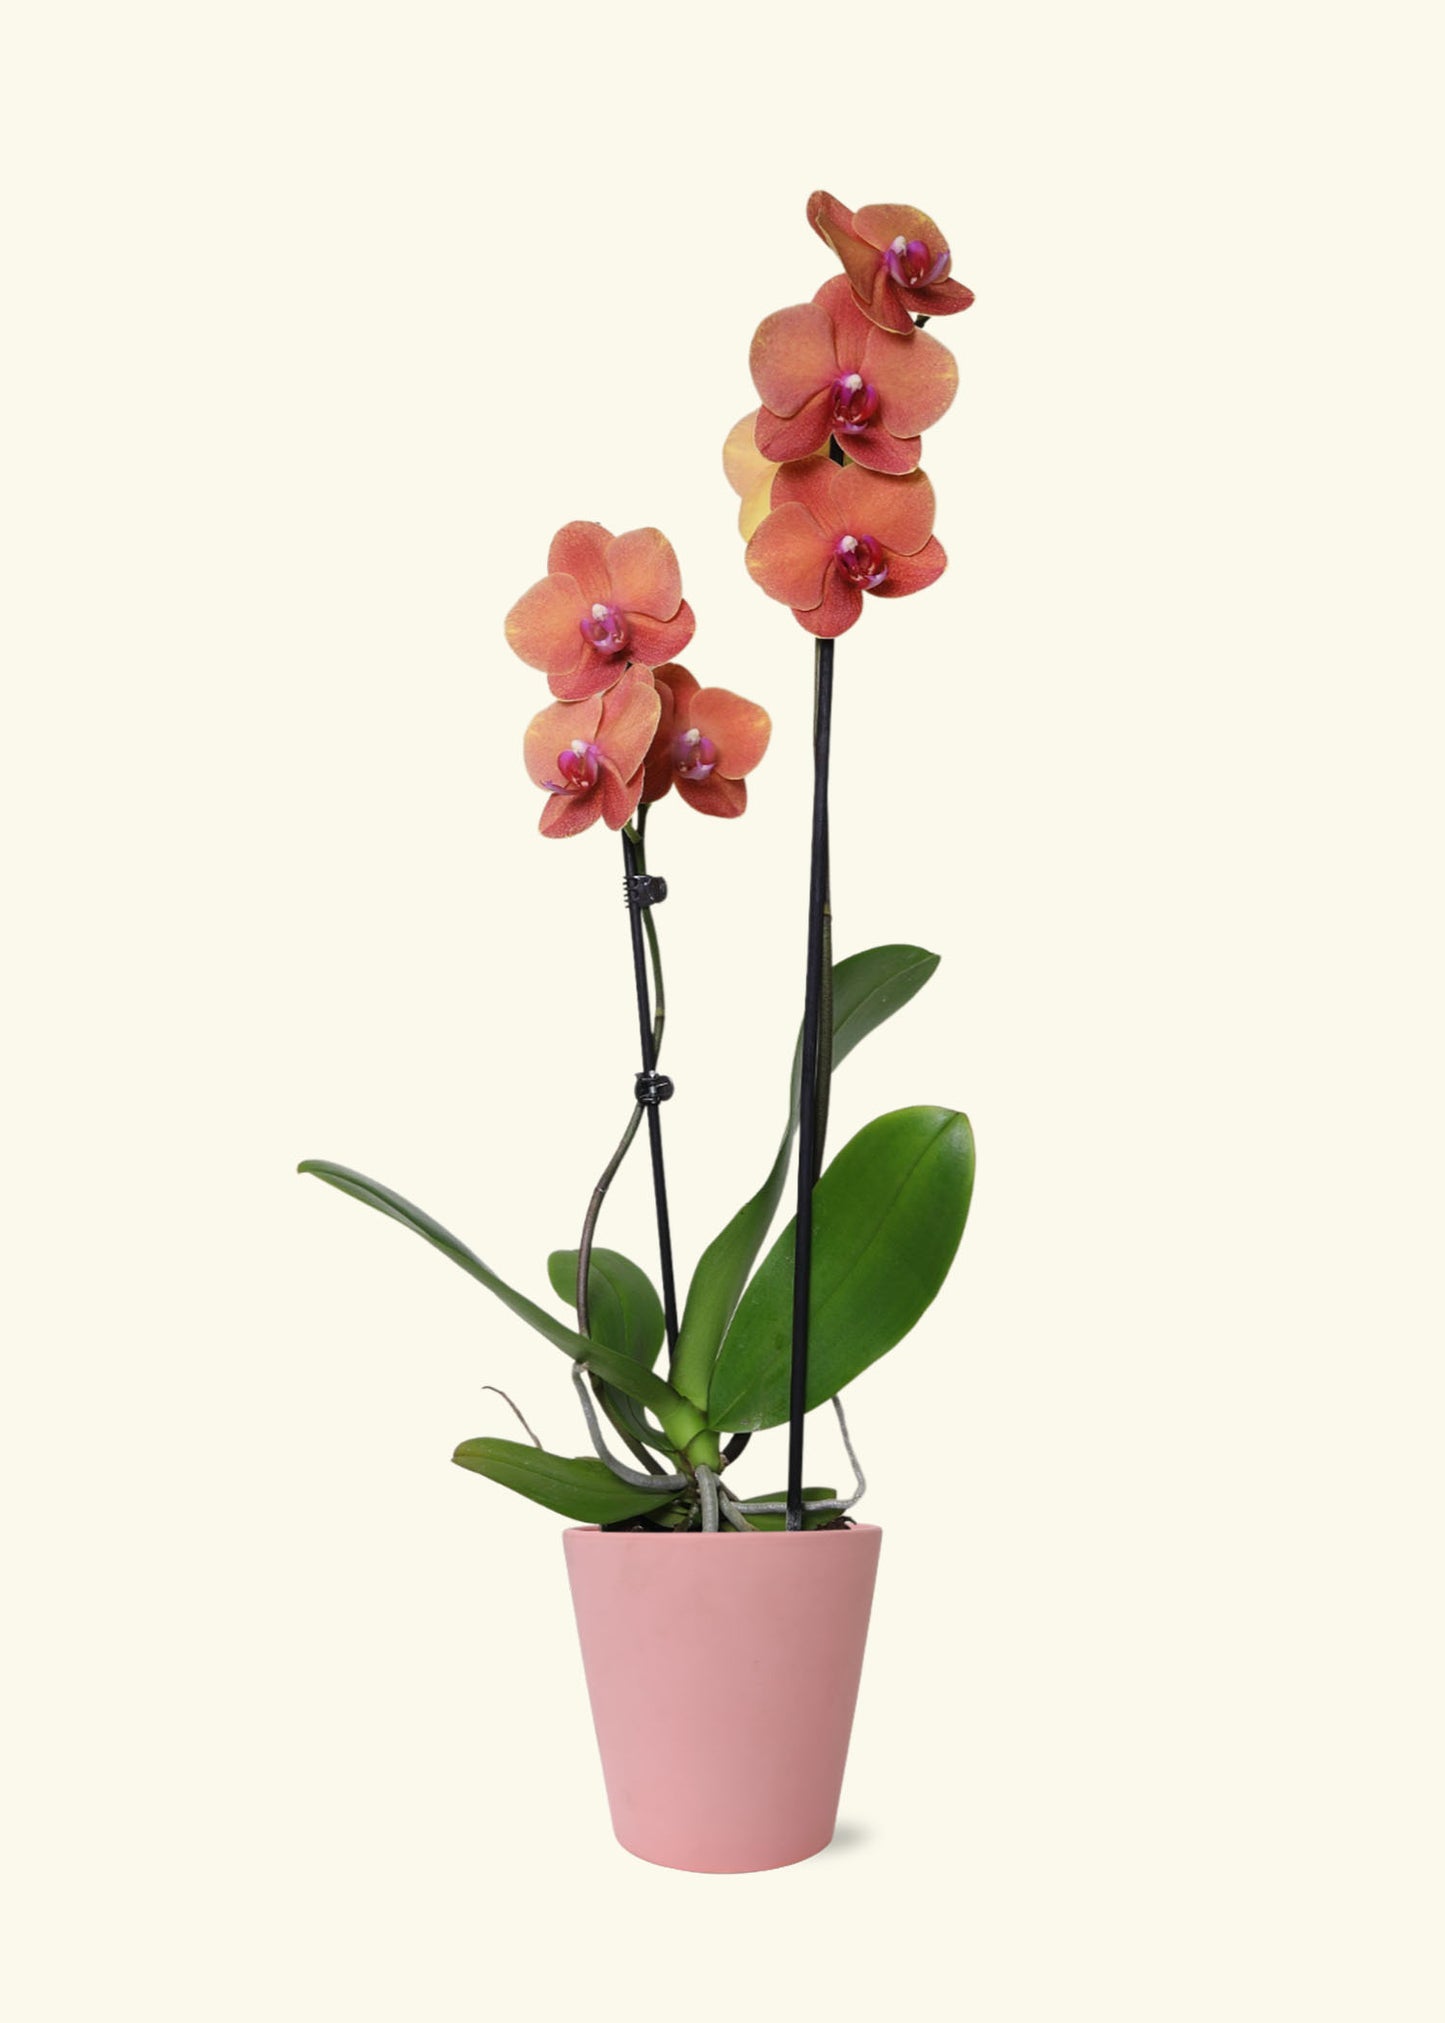 Small Coral Orchid in a pink jane matte ceramic grow pot.